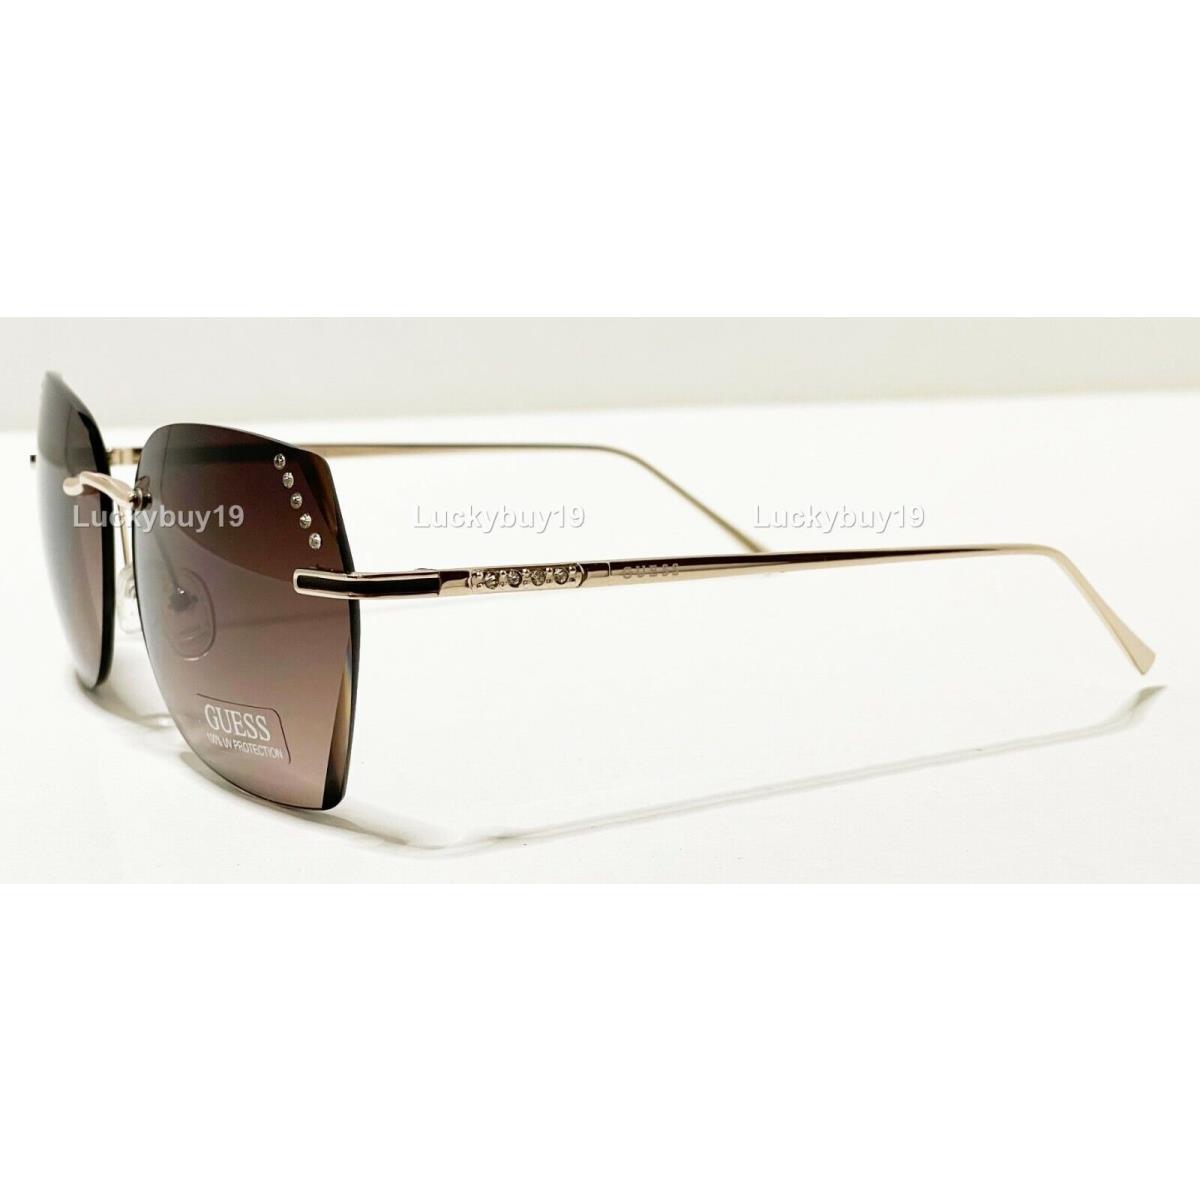 Guess sunglasses  - Gold Frame, Brown Lens 6